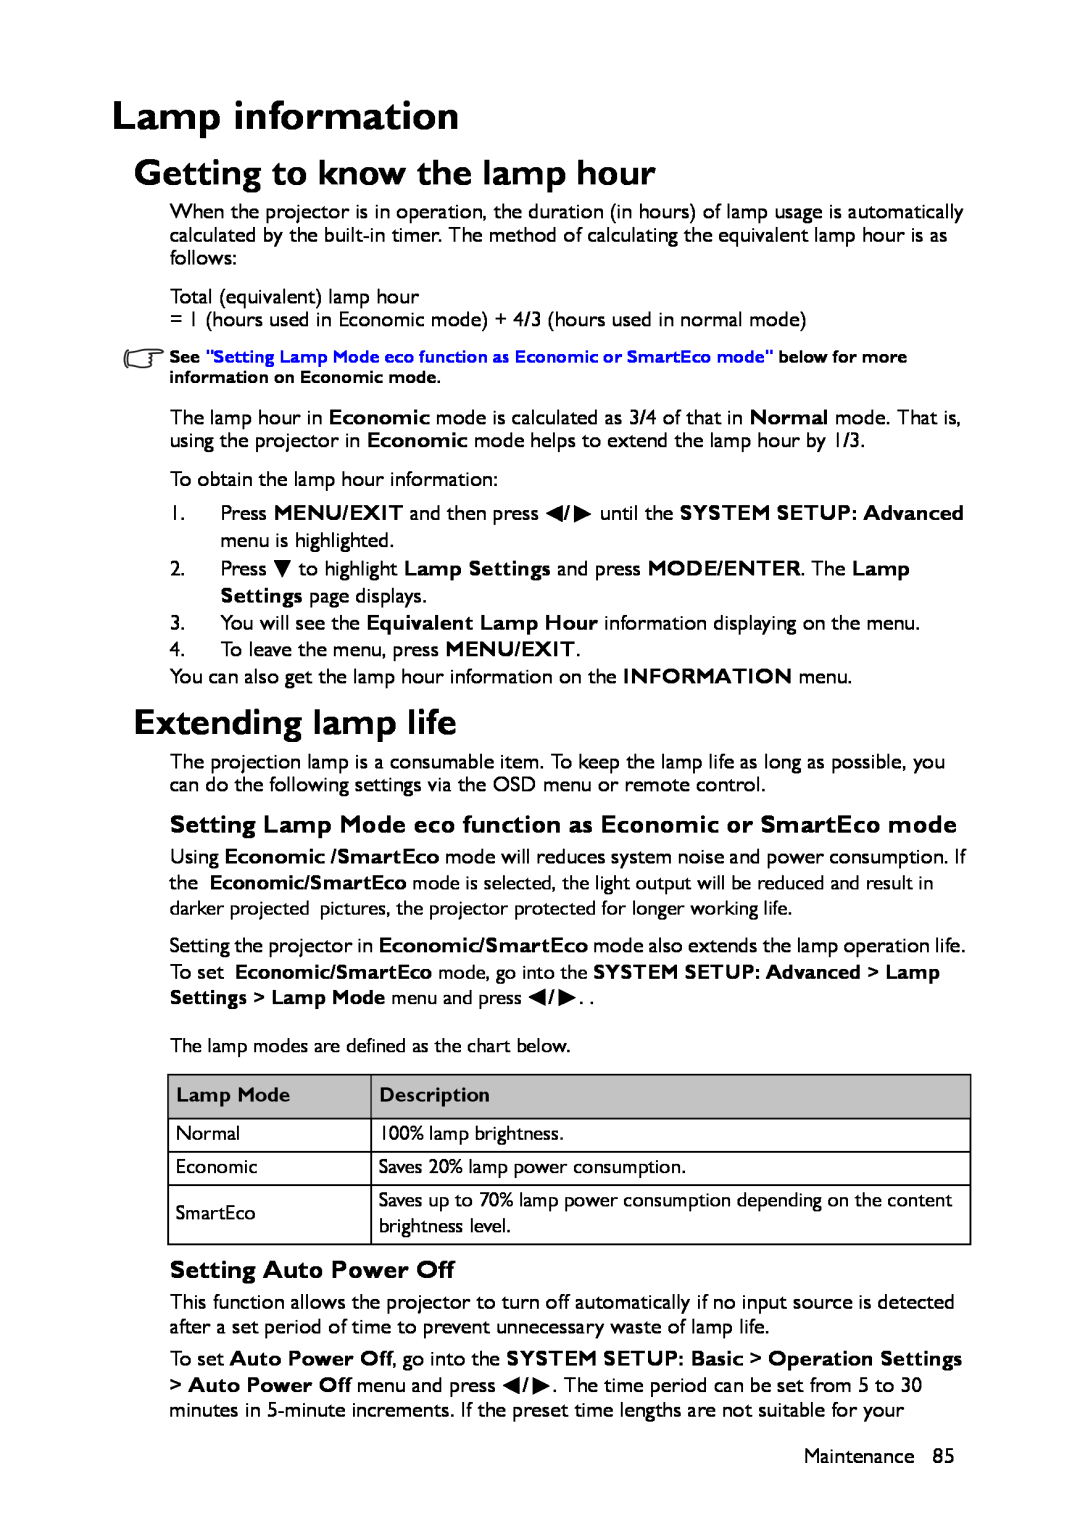 BenQ MX661 user manual Lamp information, Getting to know the lamp hour, Extending lamp life, Setting Auto Power Off 